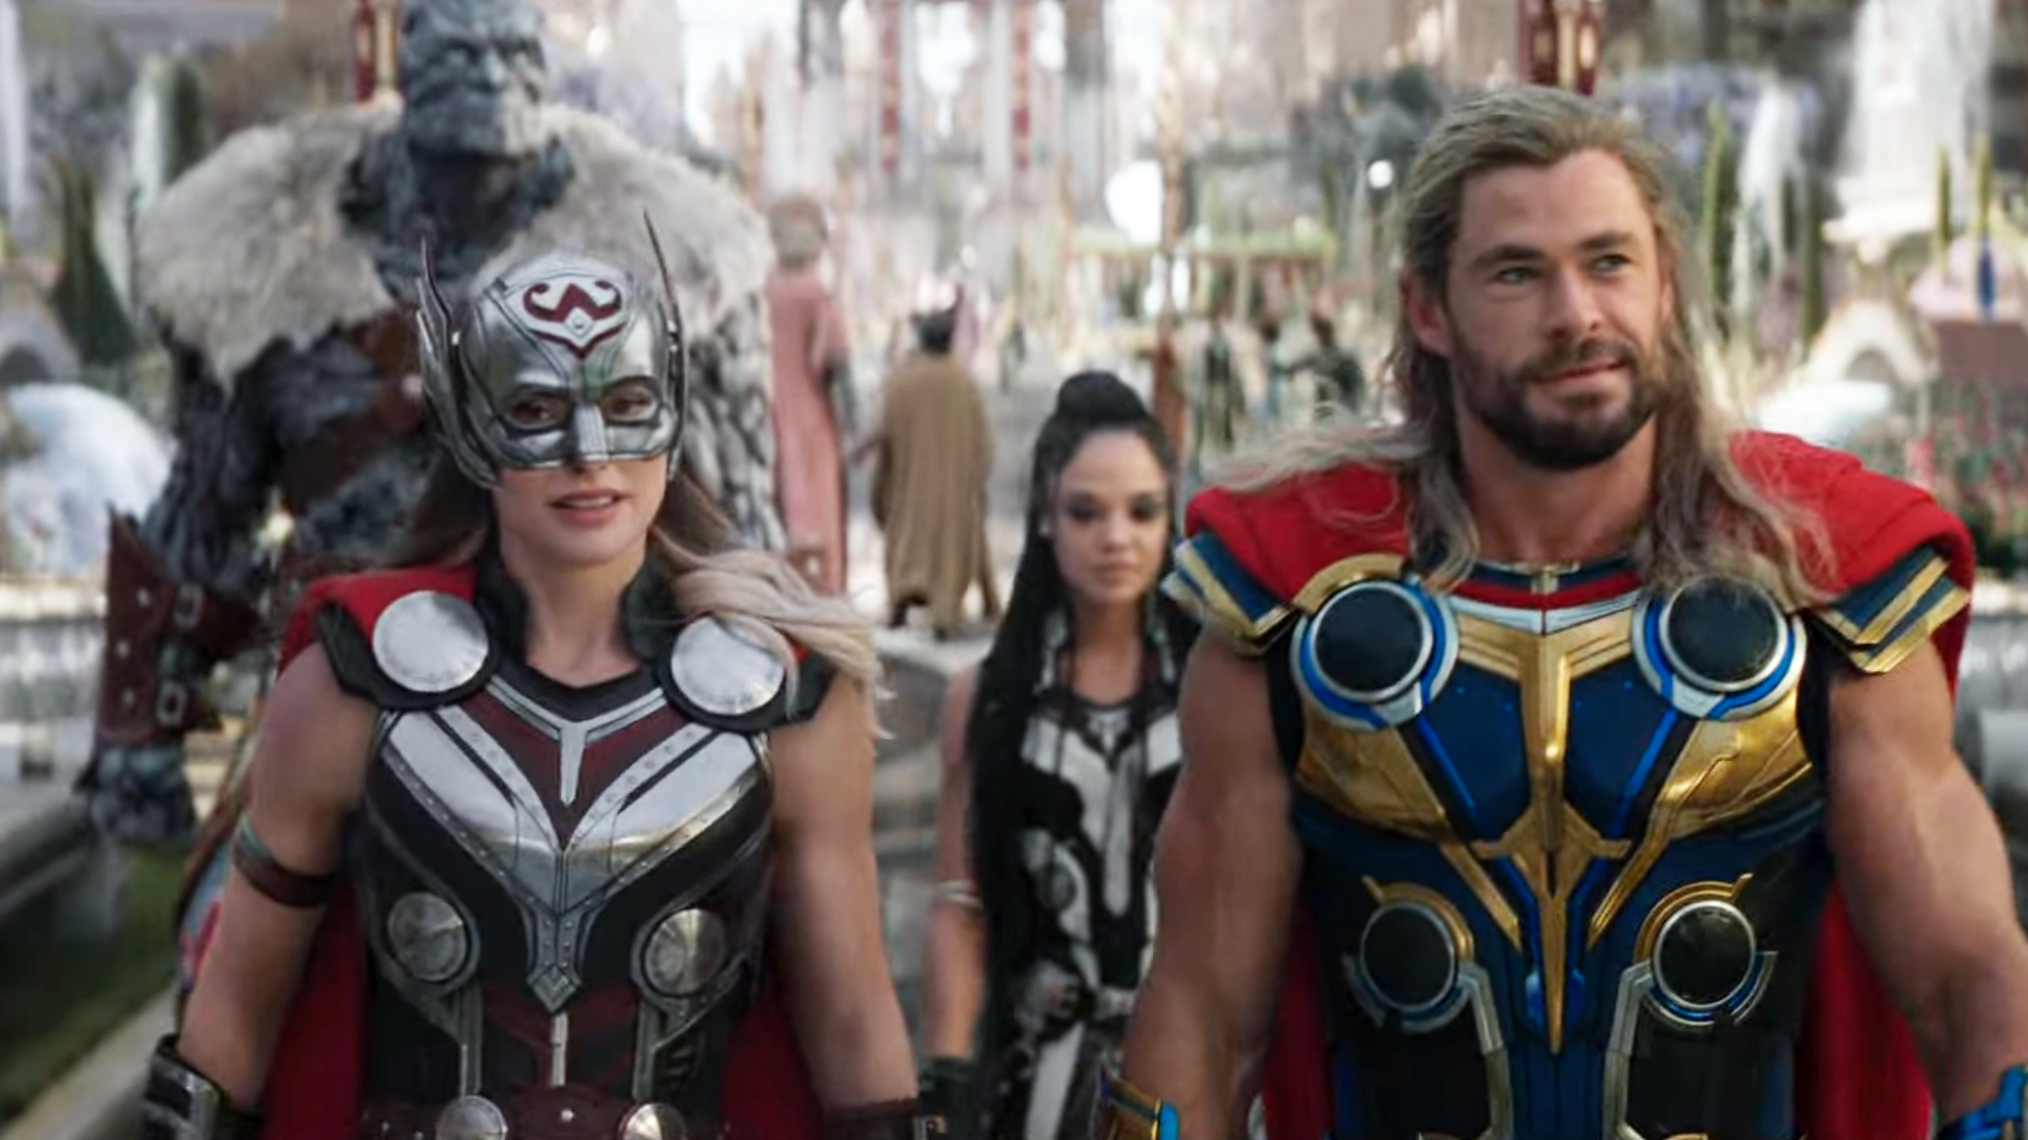 New “Thor” Movie Starts Tonight With Meh Reviews Compared to Last One: Will it Matter?